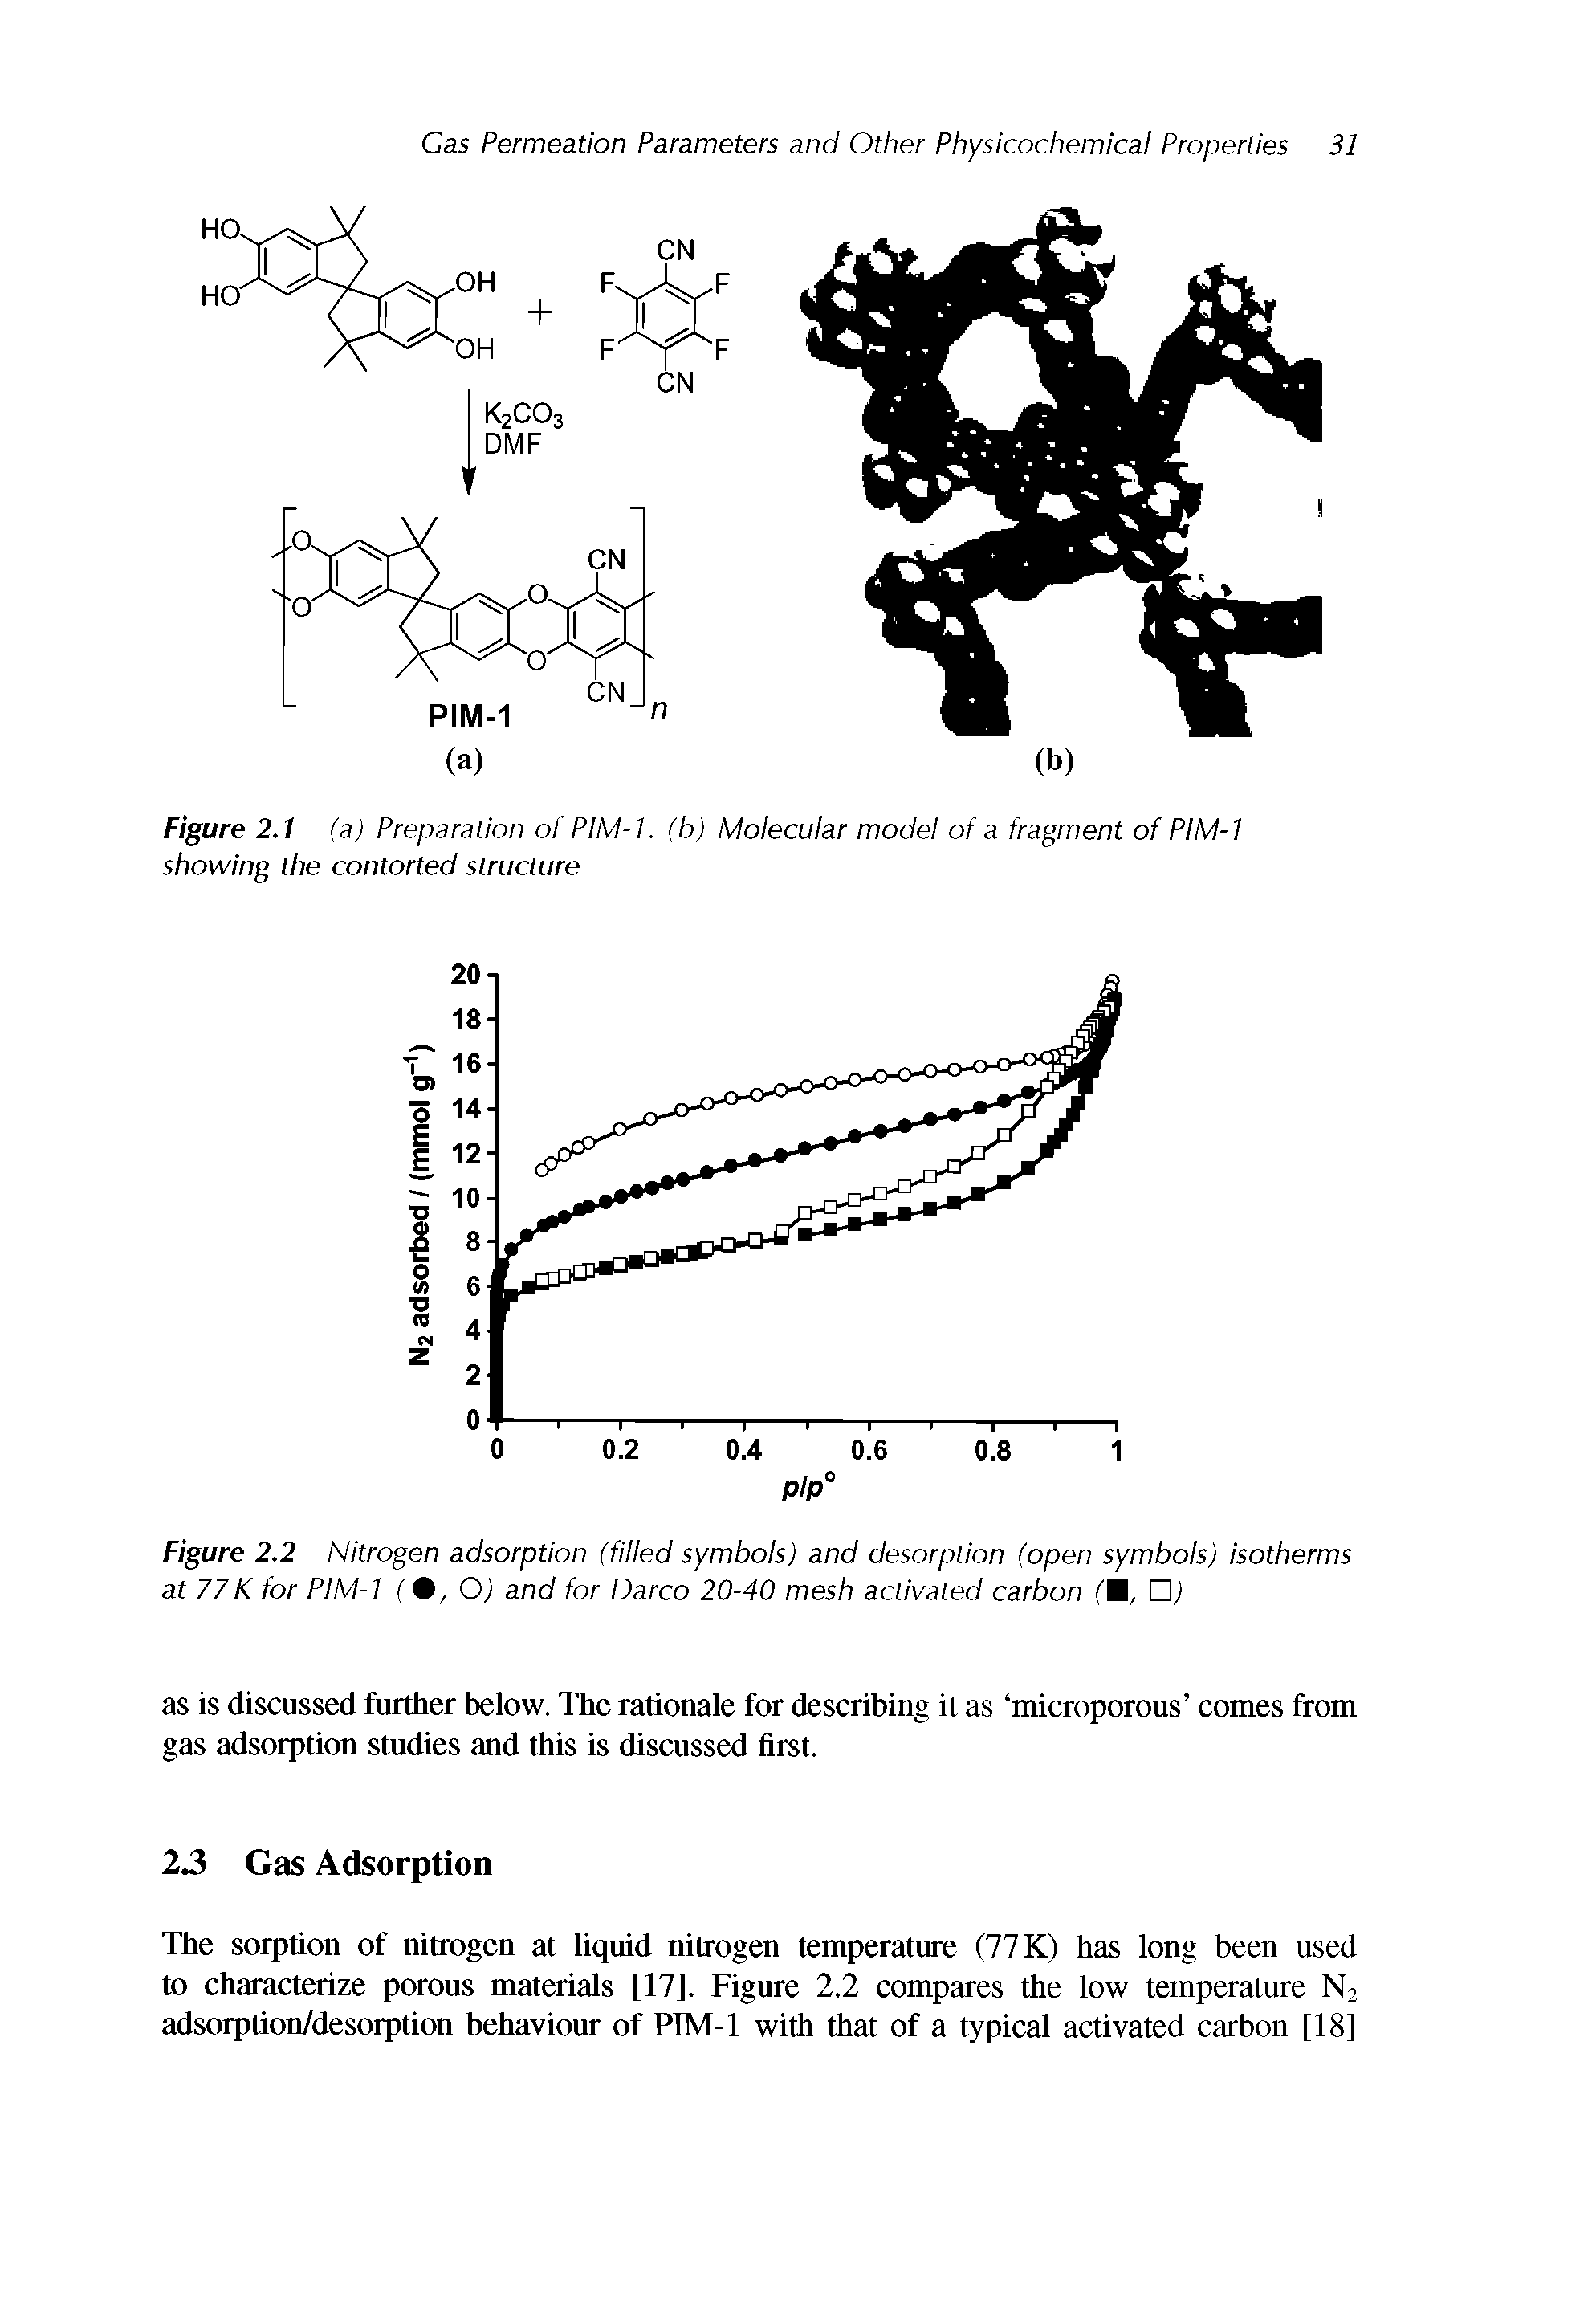 Figure 2.2 Nitrogen adsorption (filled symbols) and desorption (open symbols) isotherms at 77K for PIM-I (%, O) and for Darco 20-40 mesh activated carbon (M, Dj...